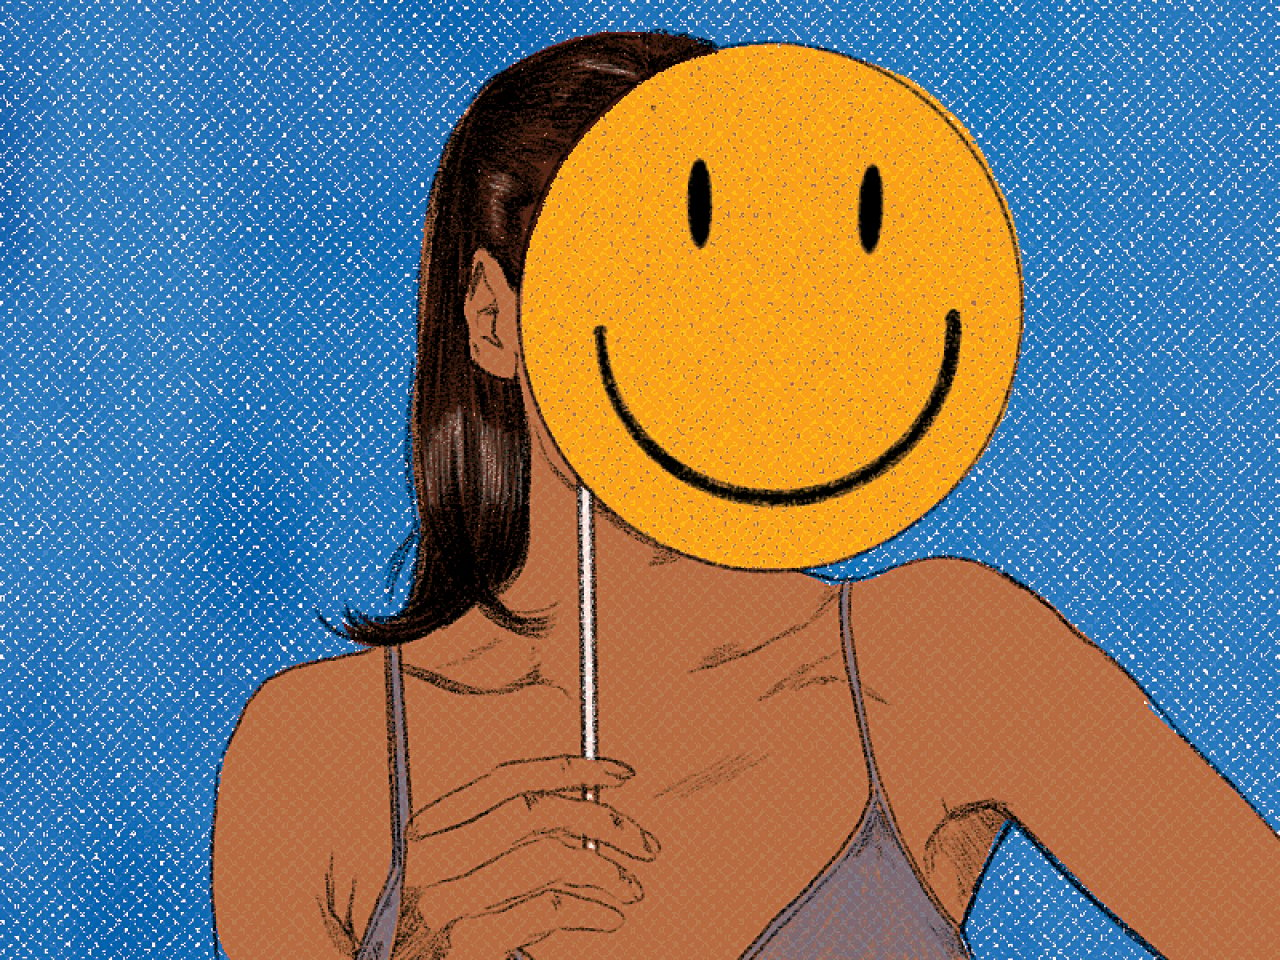 An illustration of a woman holding a mask with a yellow smiley face over her own face, representing the mood swings experienced during menopause.